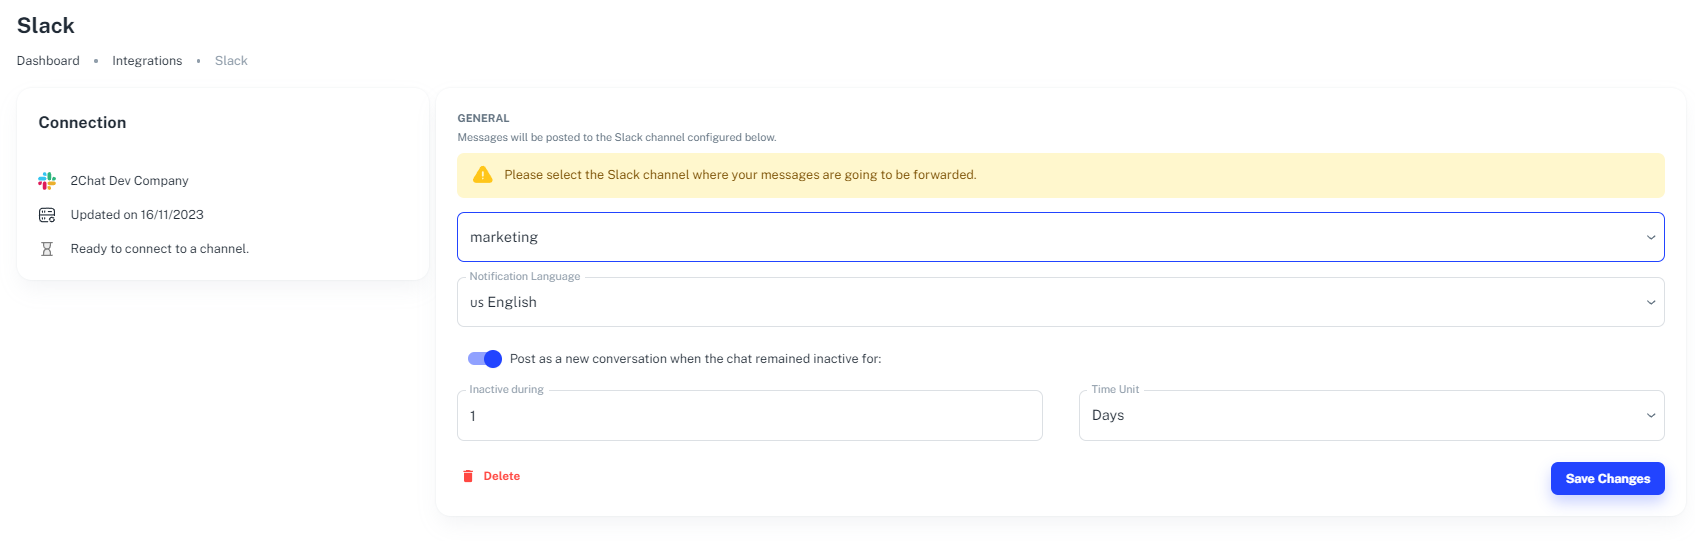 How to integrate WhatsApp and Slack for message forwarding